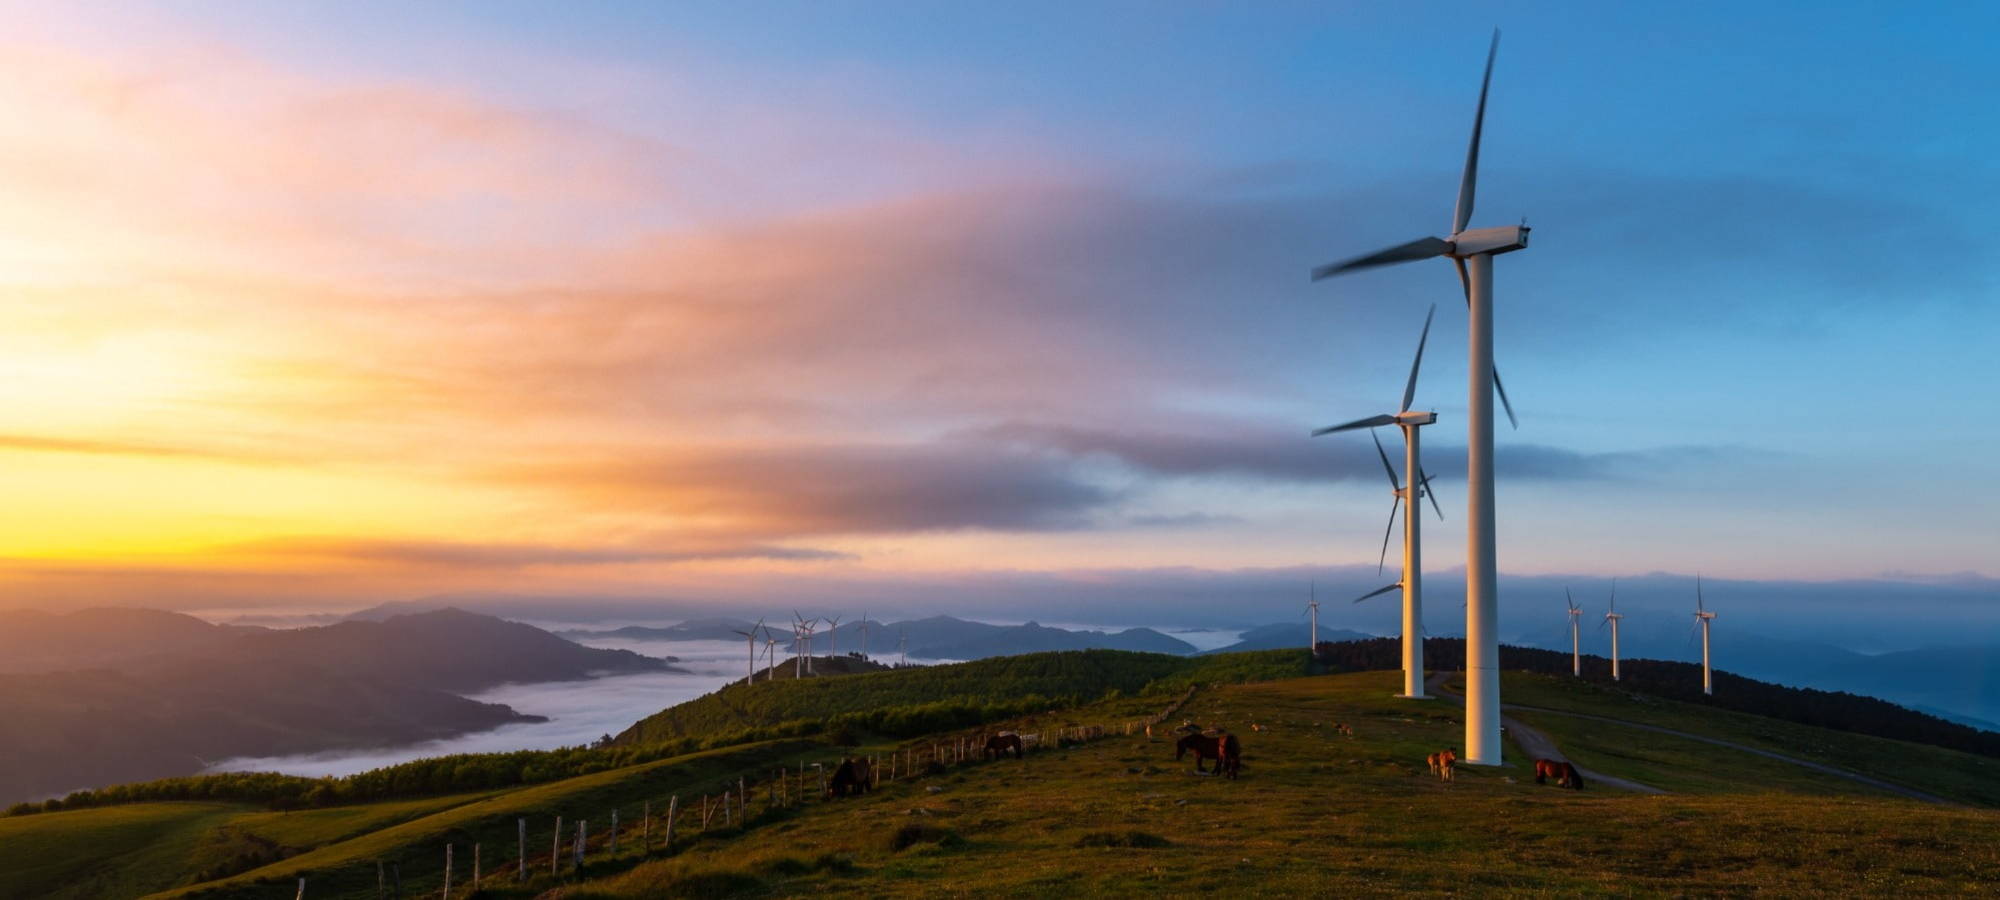 Sunset and windfarm with clouds and mountains in the back ersg